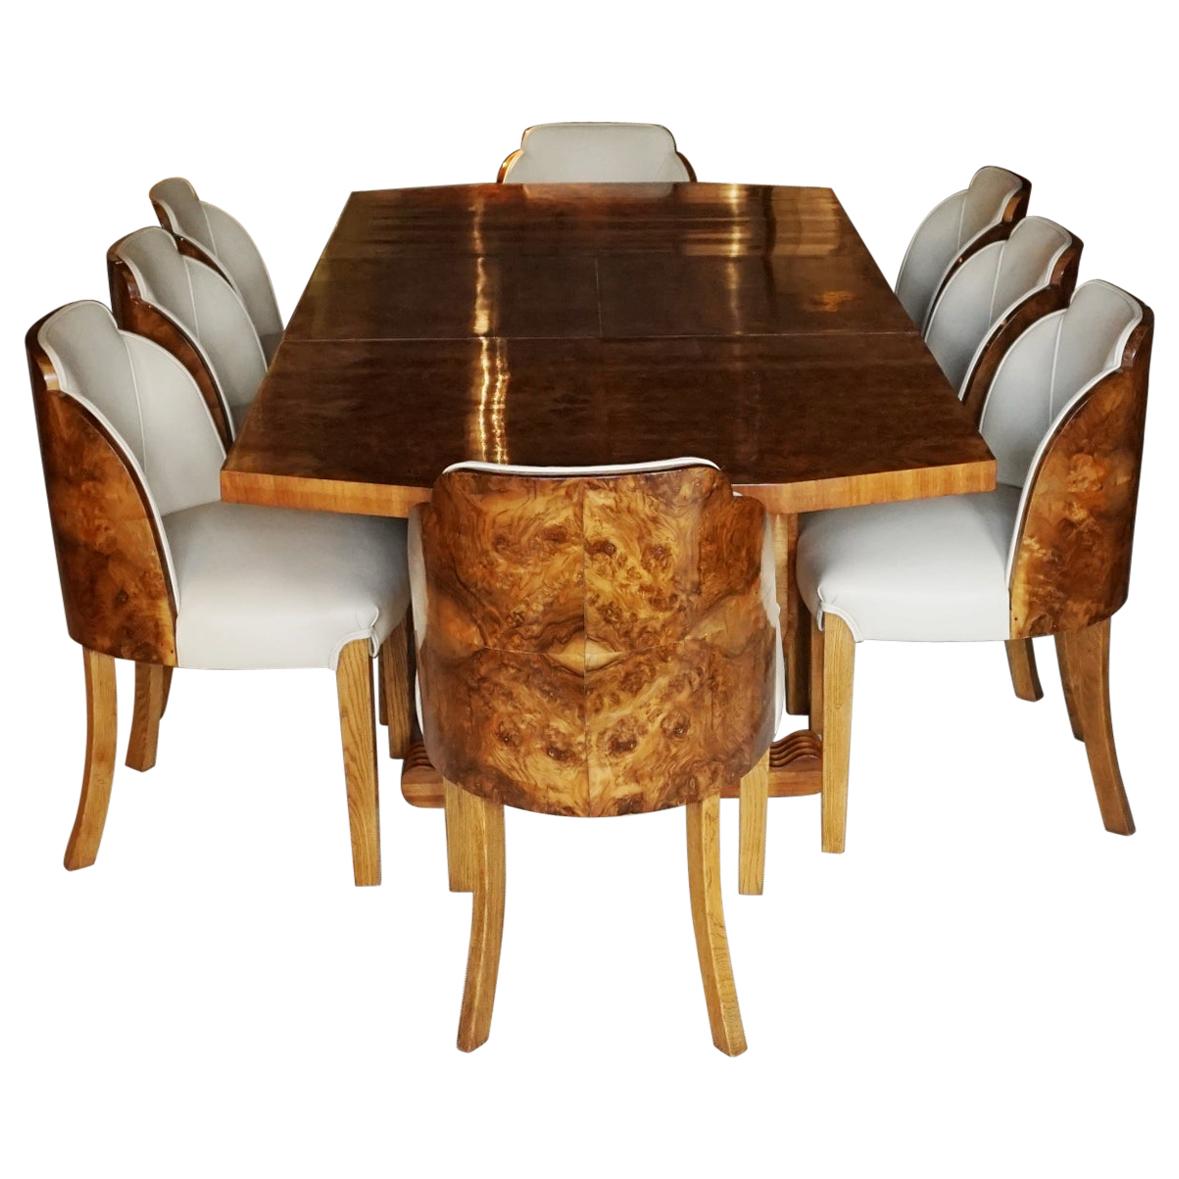 Art Deco Six-Eight Seater Dining Suite English, Circa 1930